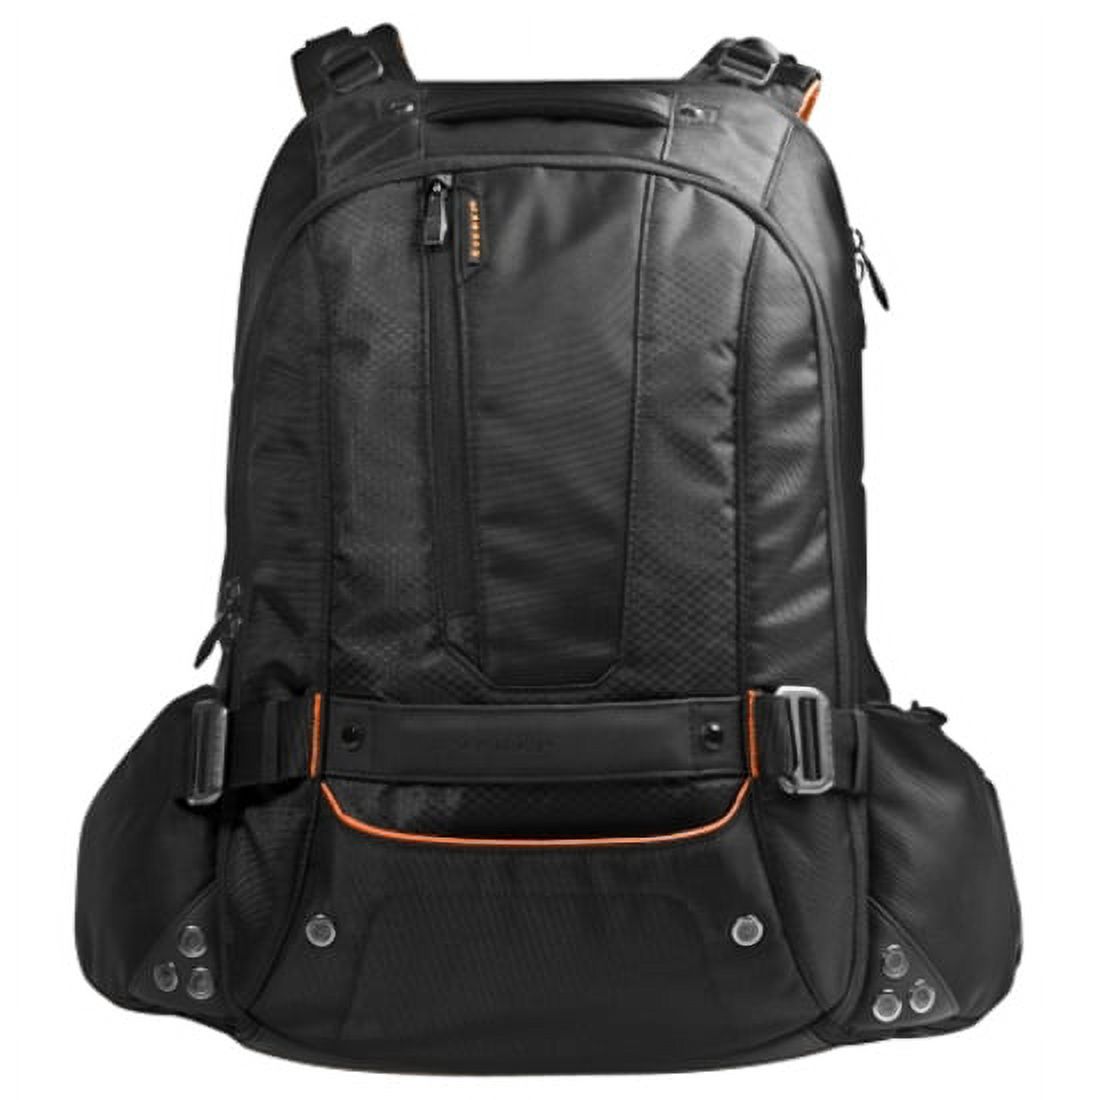 Beacon Laptop Backpack with Gaming Console Sleeve, fits up to 18 (EKP117NBKCT) - image 1 of 4